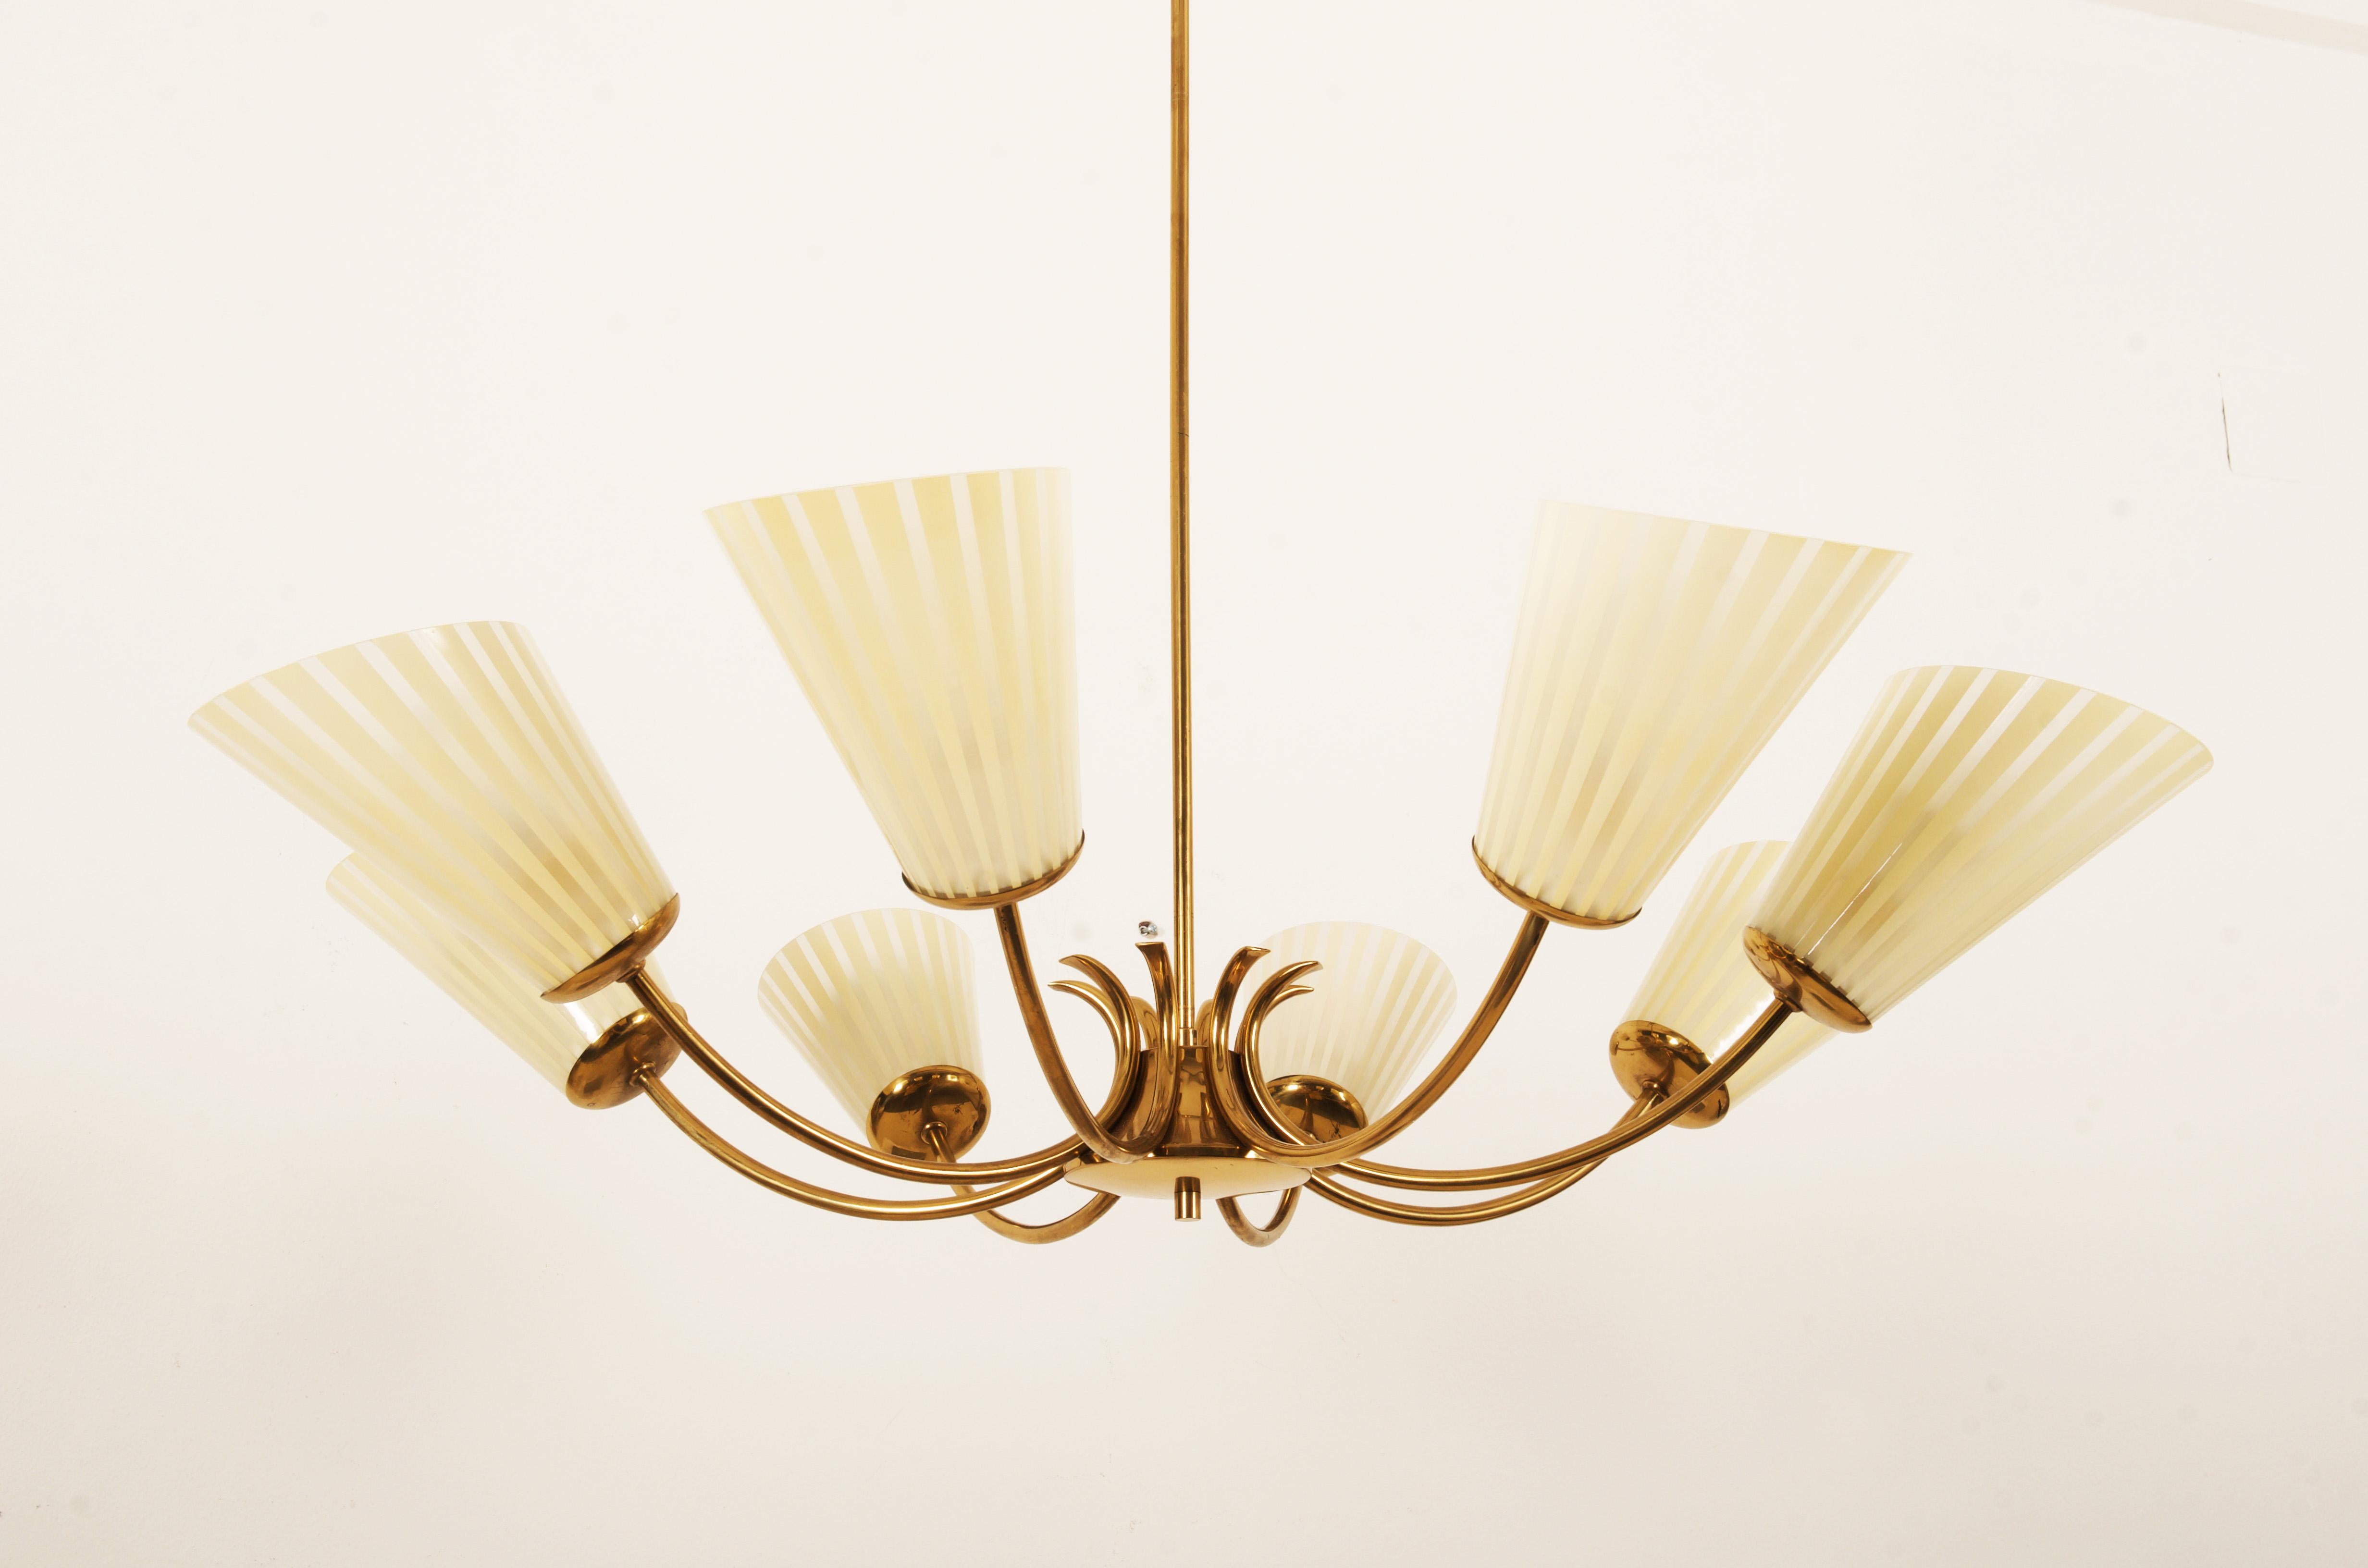 Brass frame with eight arms and opaline glass shades each fitted with E27 sockets. Made in Vienna by Rupert Nikoll in the late 1950s. Total height can be customized.